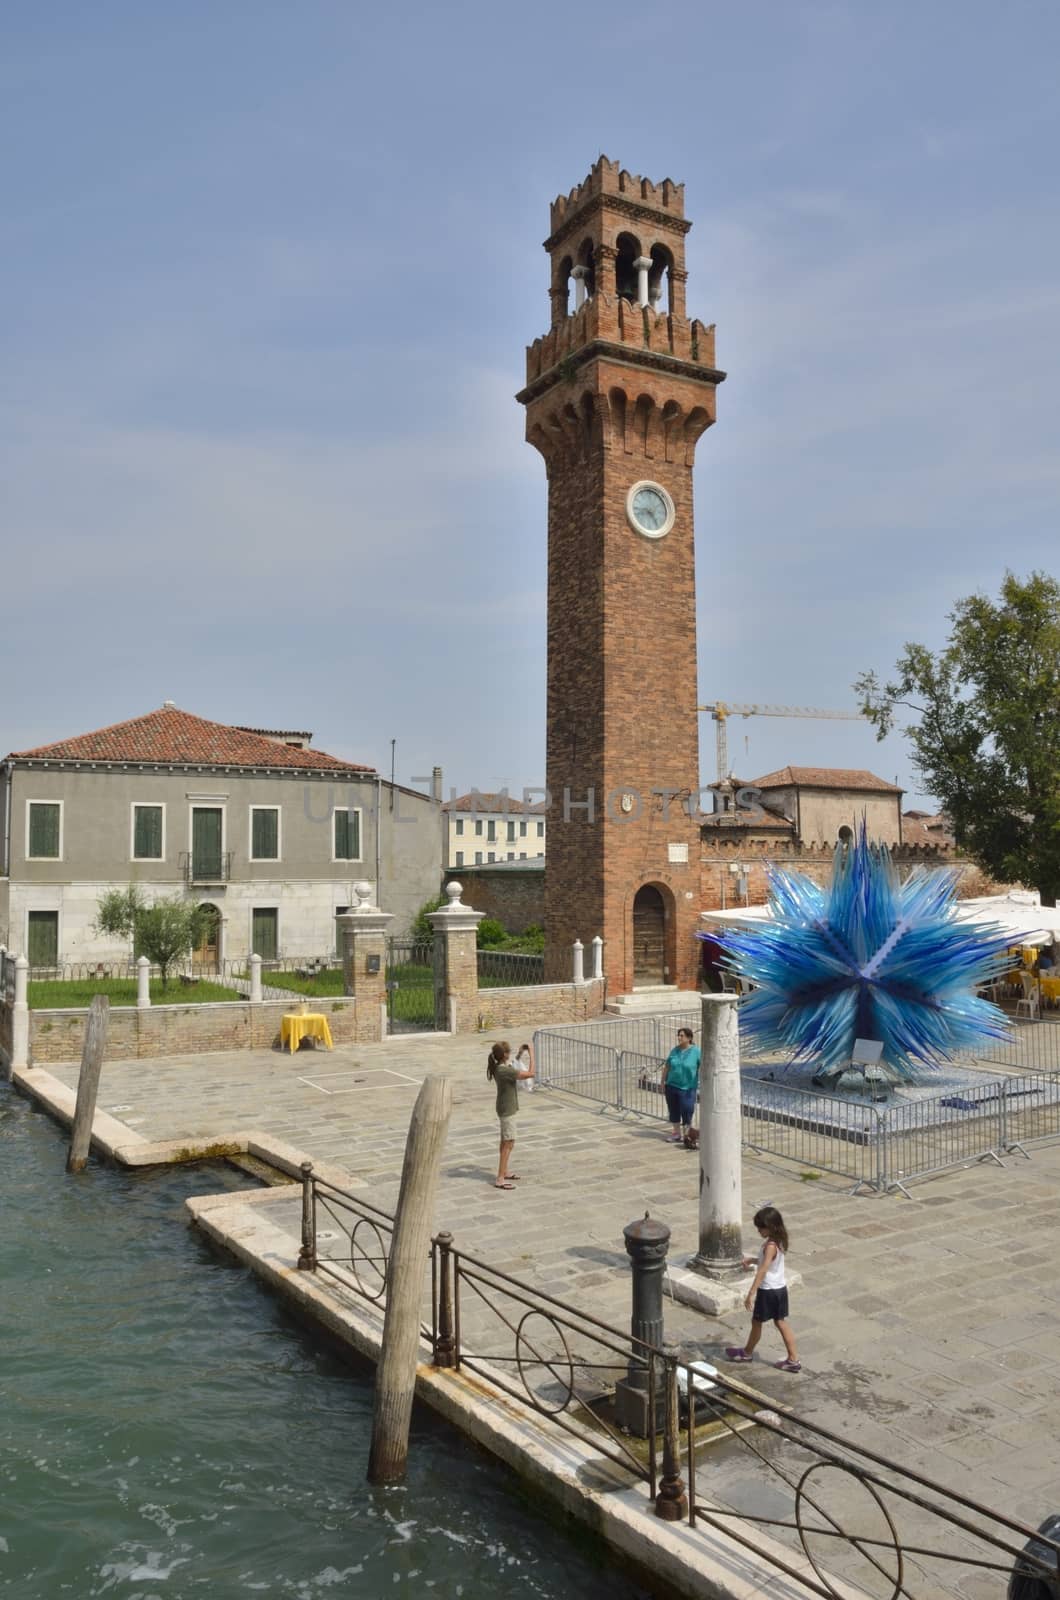 Clock tower and a blue murano glass sculpture  in Murano, Venice, Italy.